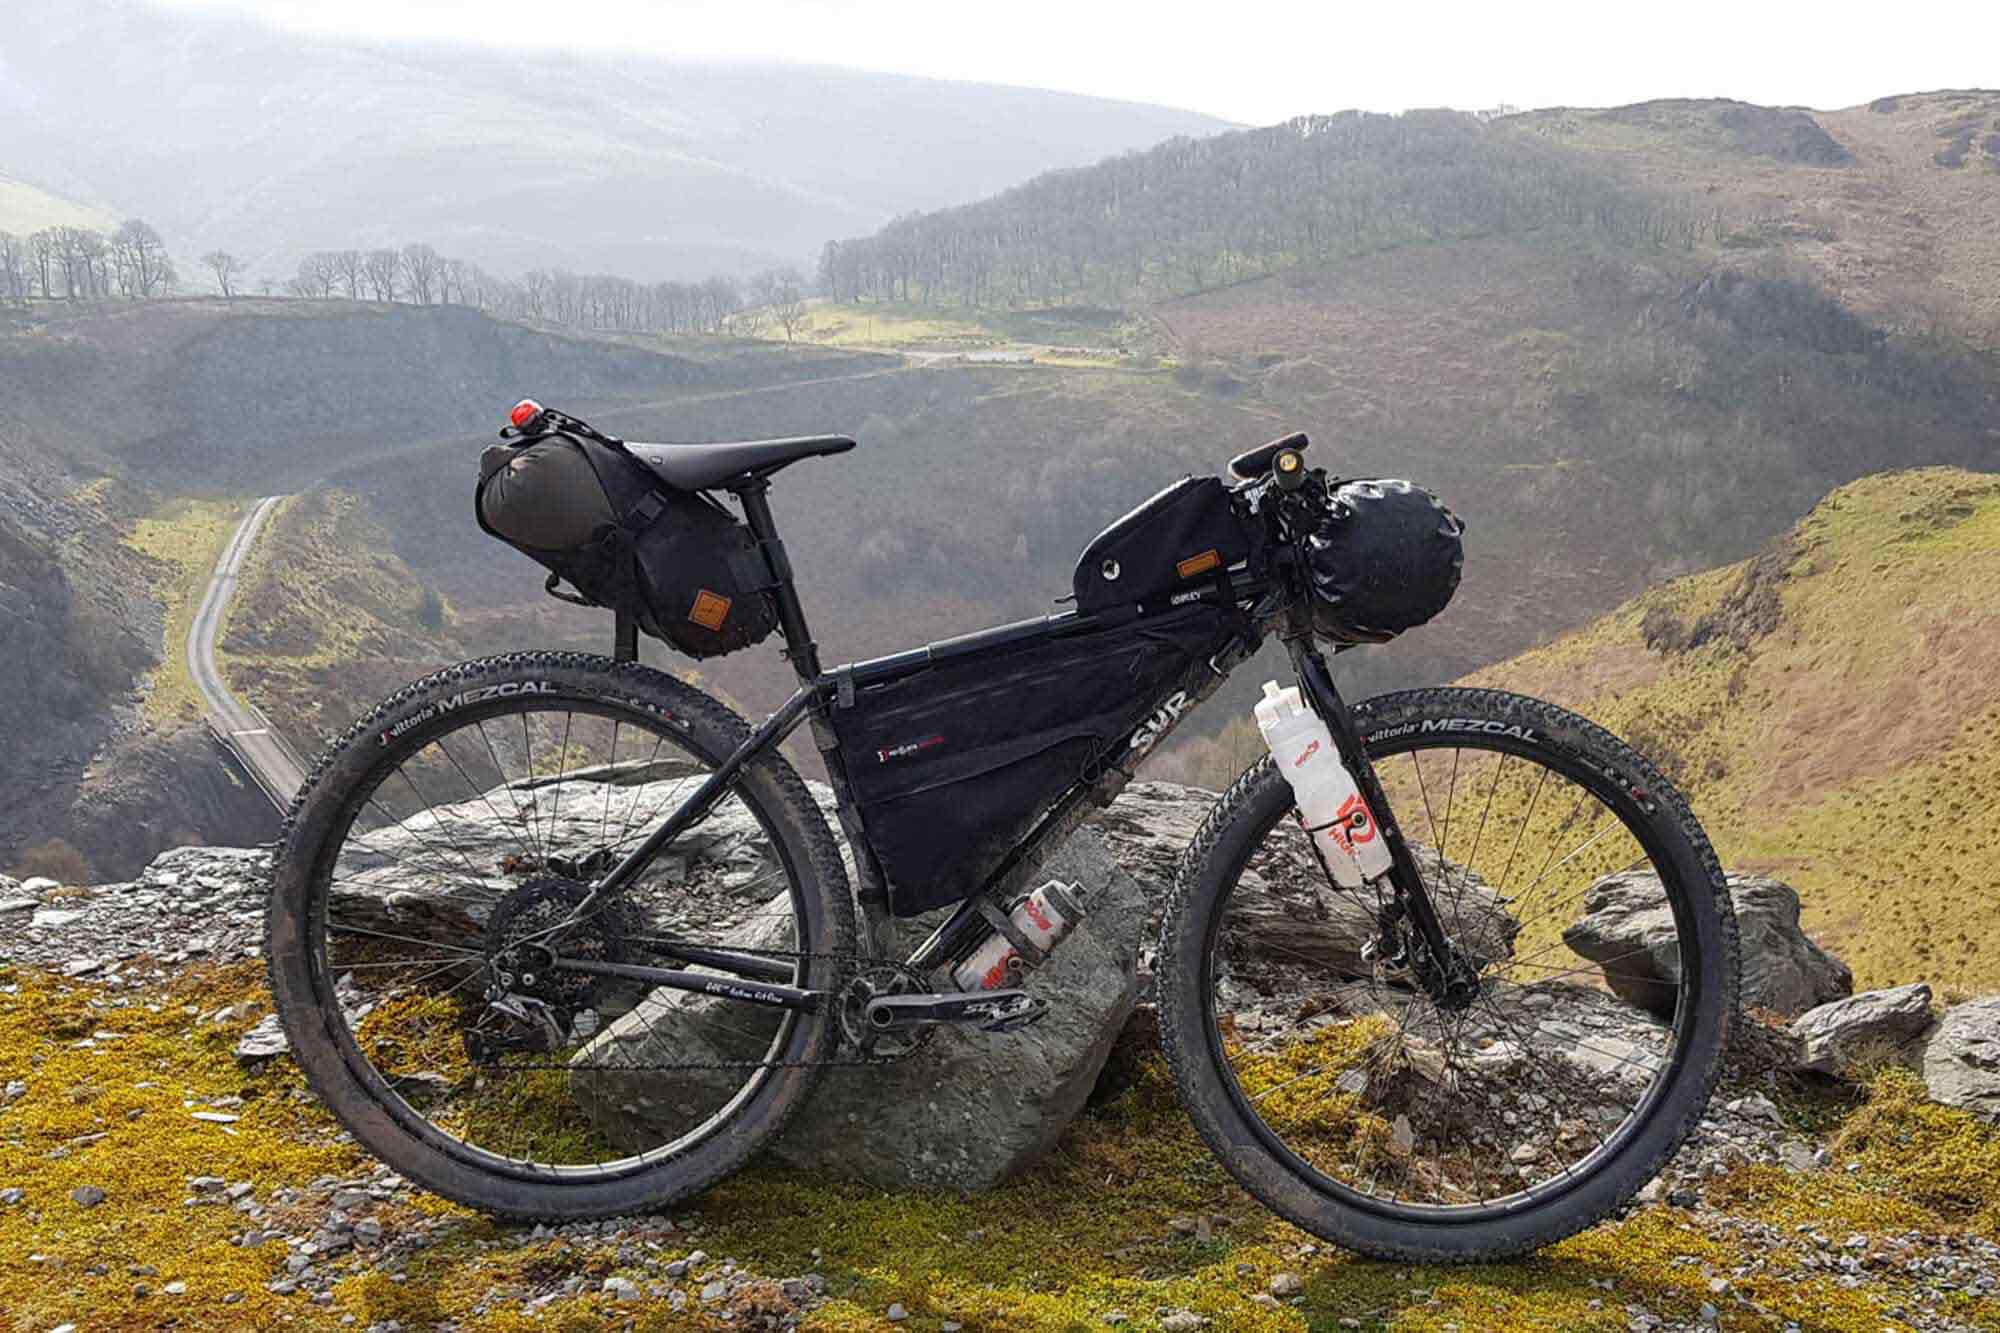 Mountain bike loaded with bags, frame pack, and multiple water bottles, leaning against rock on mountain overlook